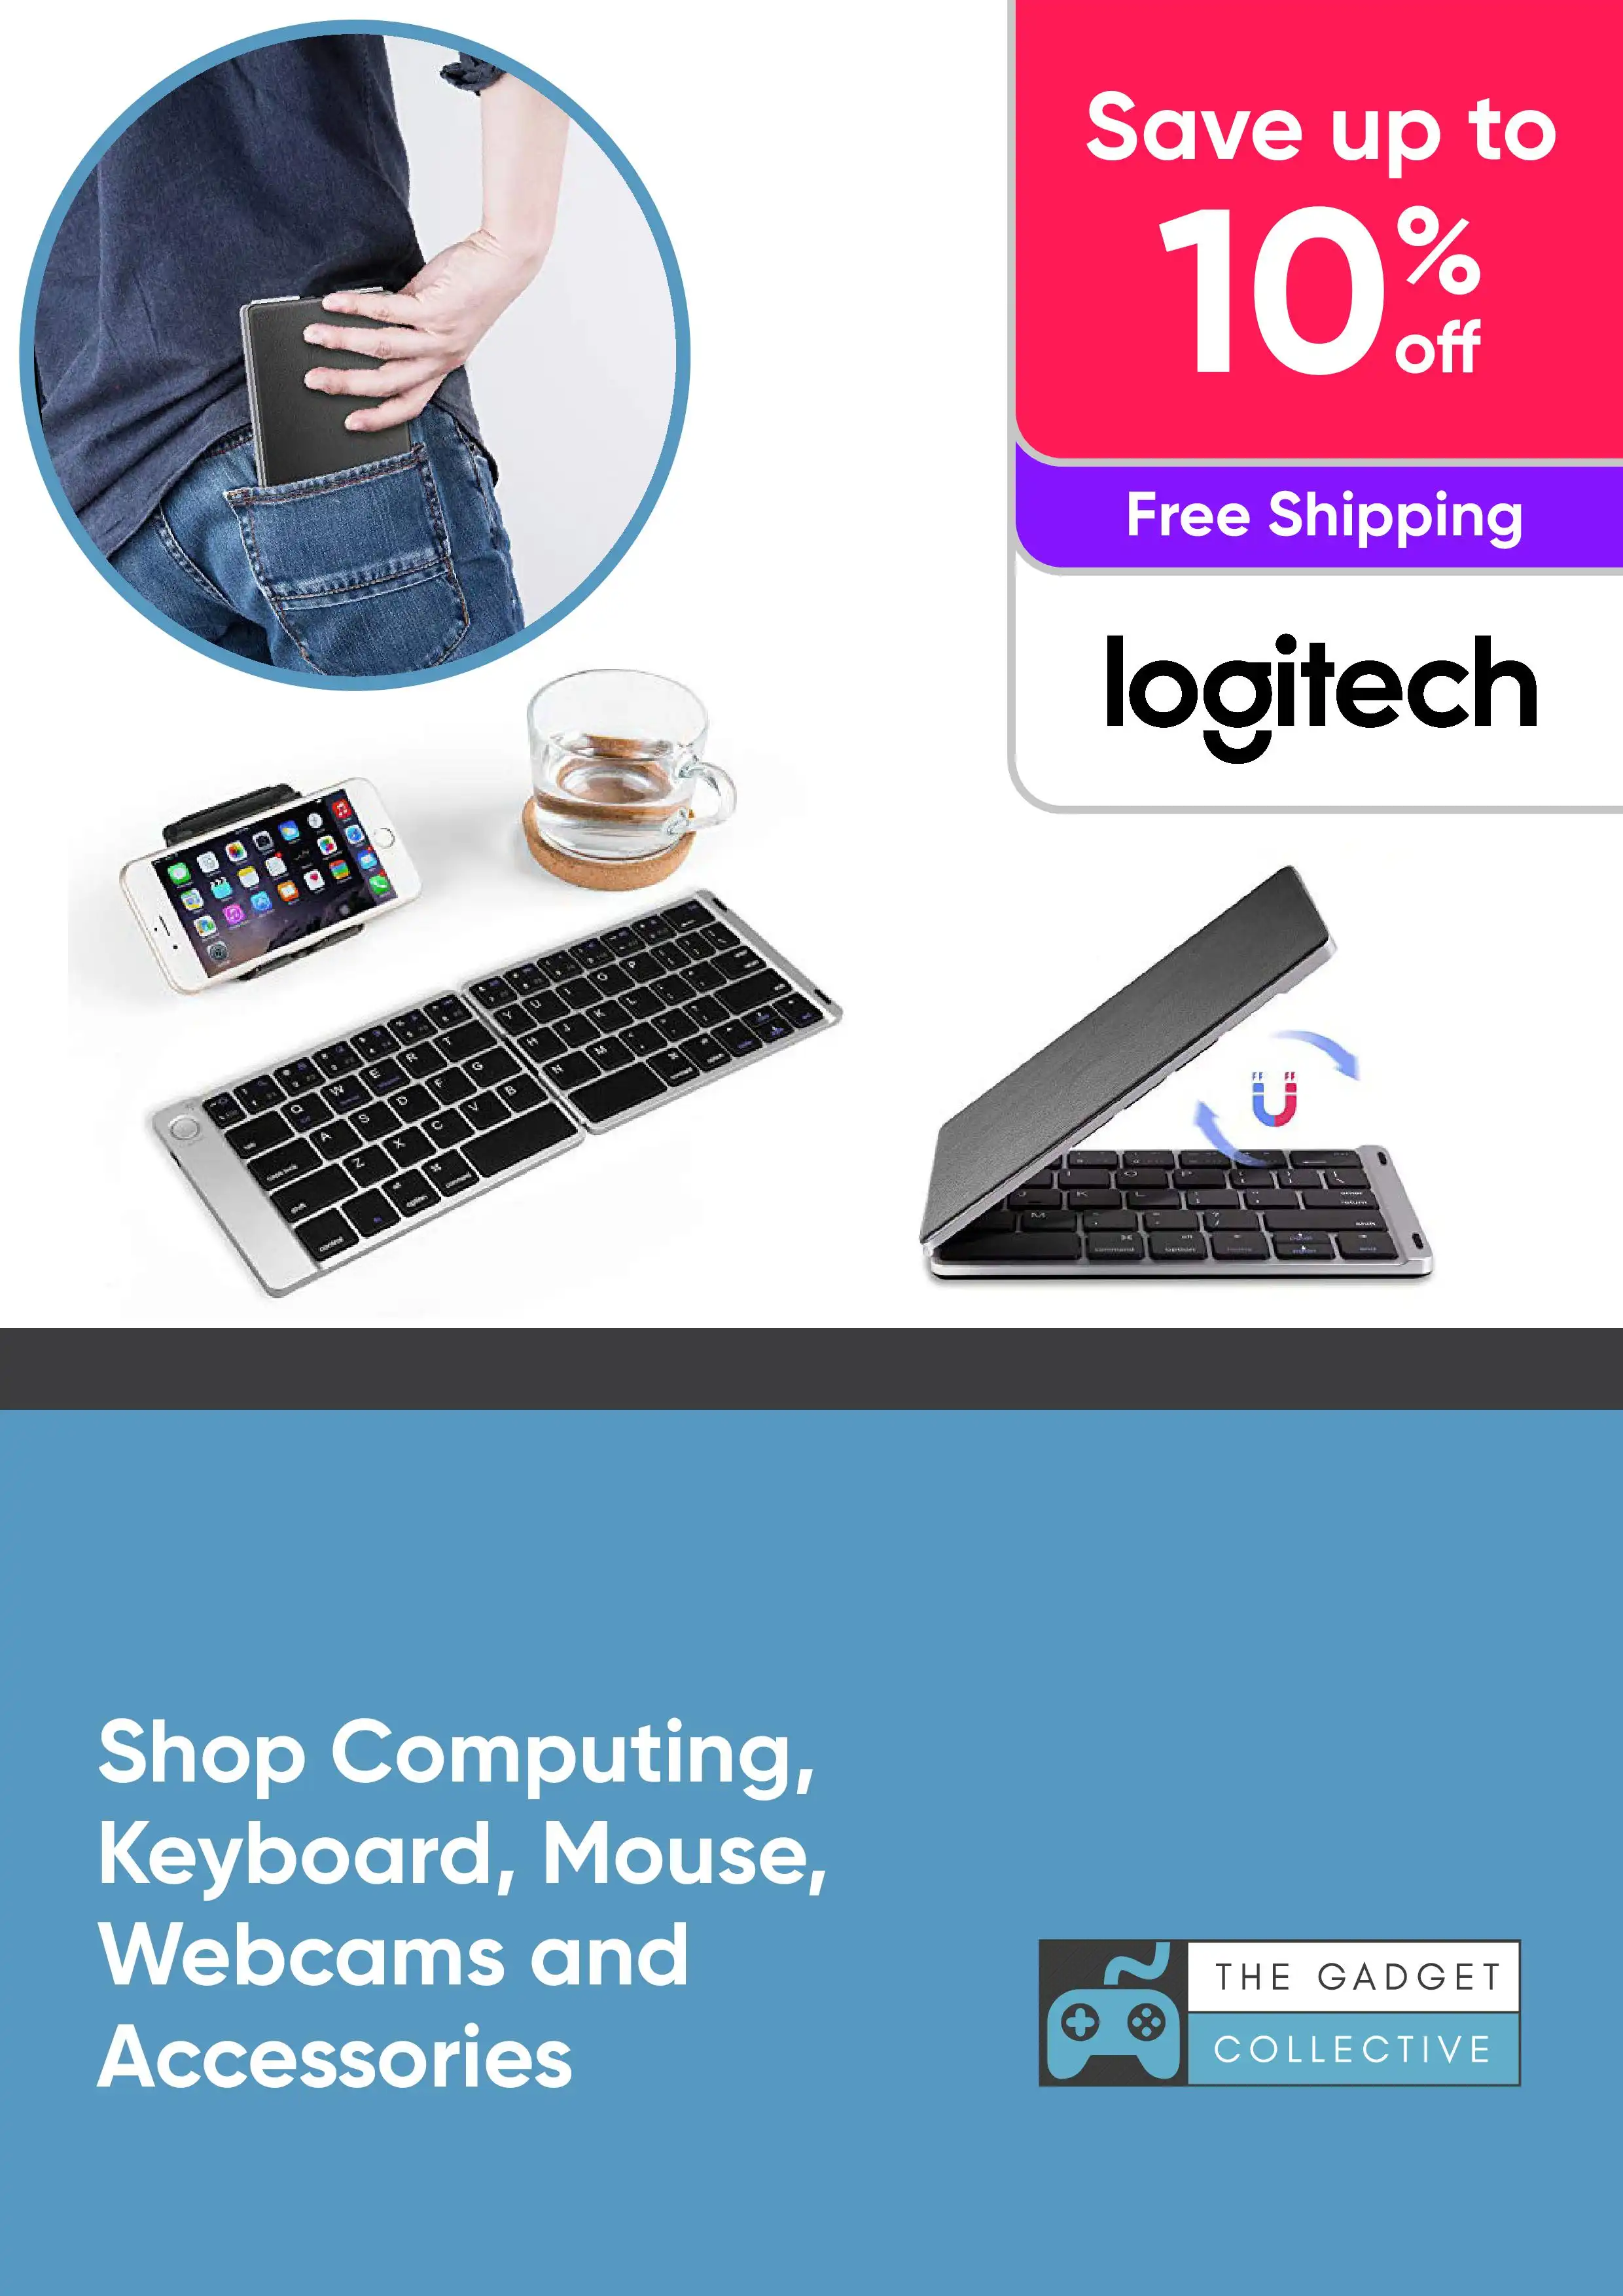 Shop Computing, Keyboard, Mouse, Webcams & Accessories - Save up to 10%